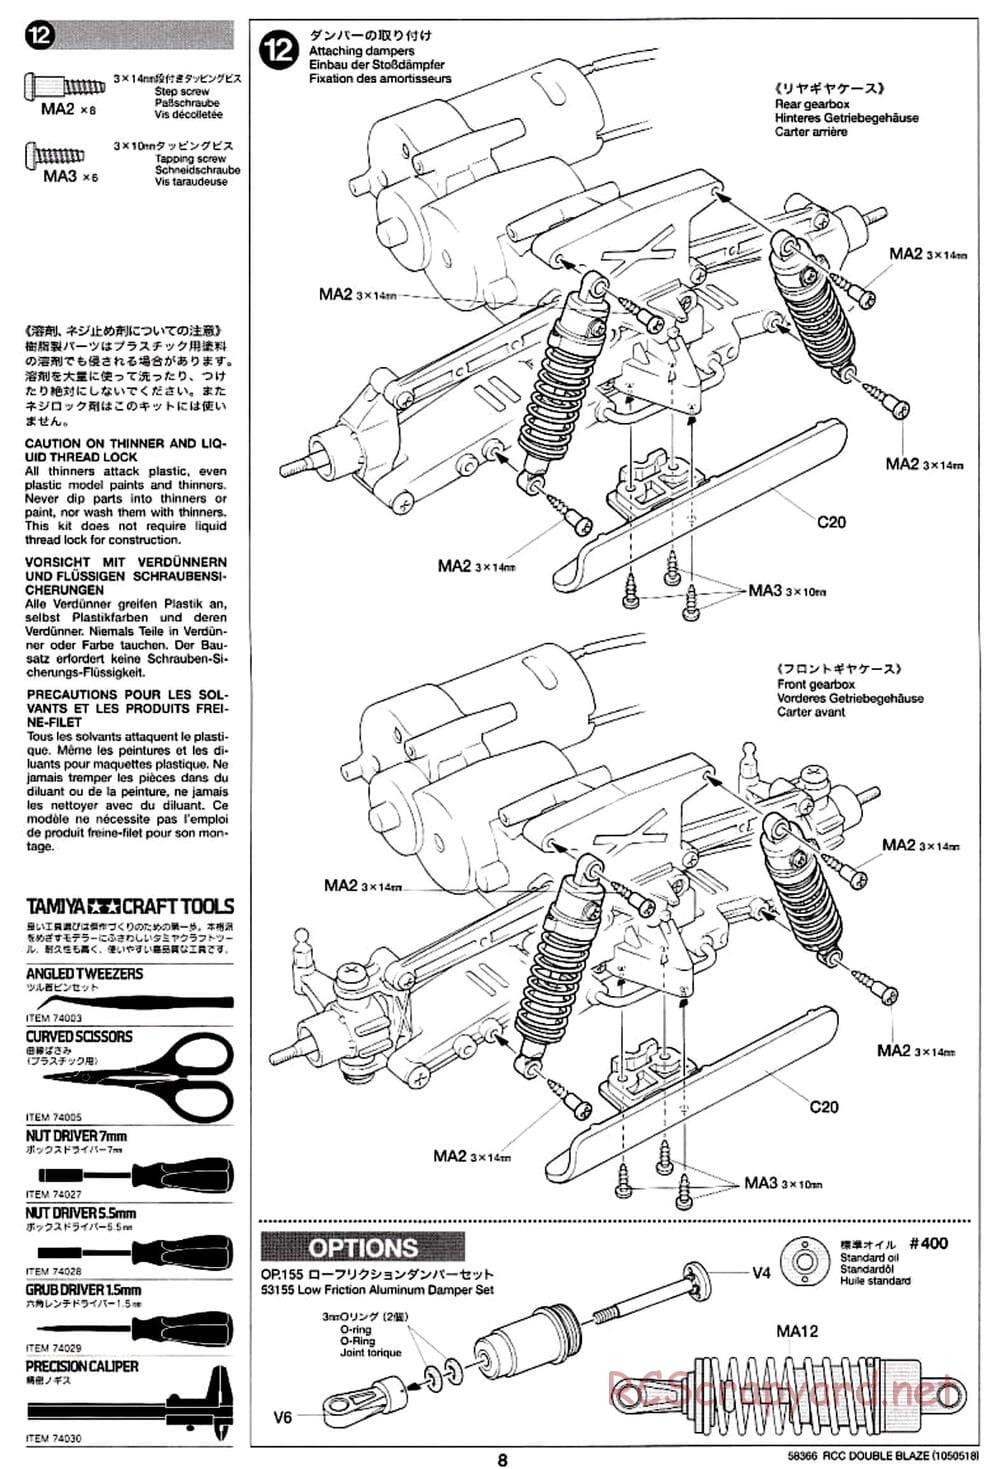 Tamiya - Double Blaze - WR-01 Chassis - Manual - Page 8